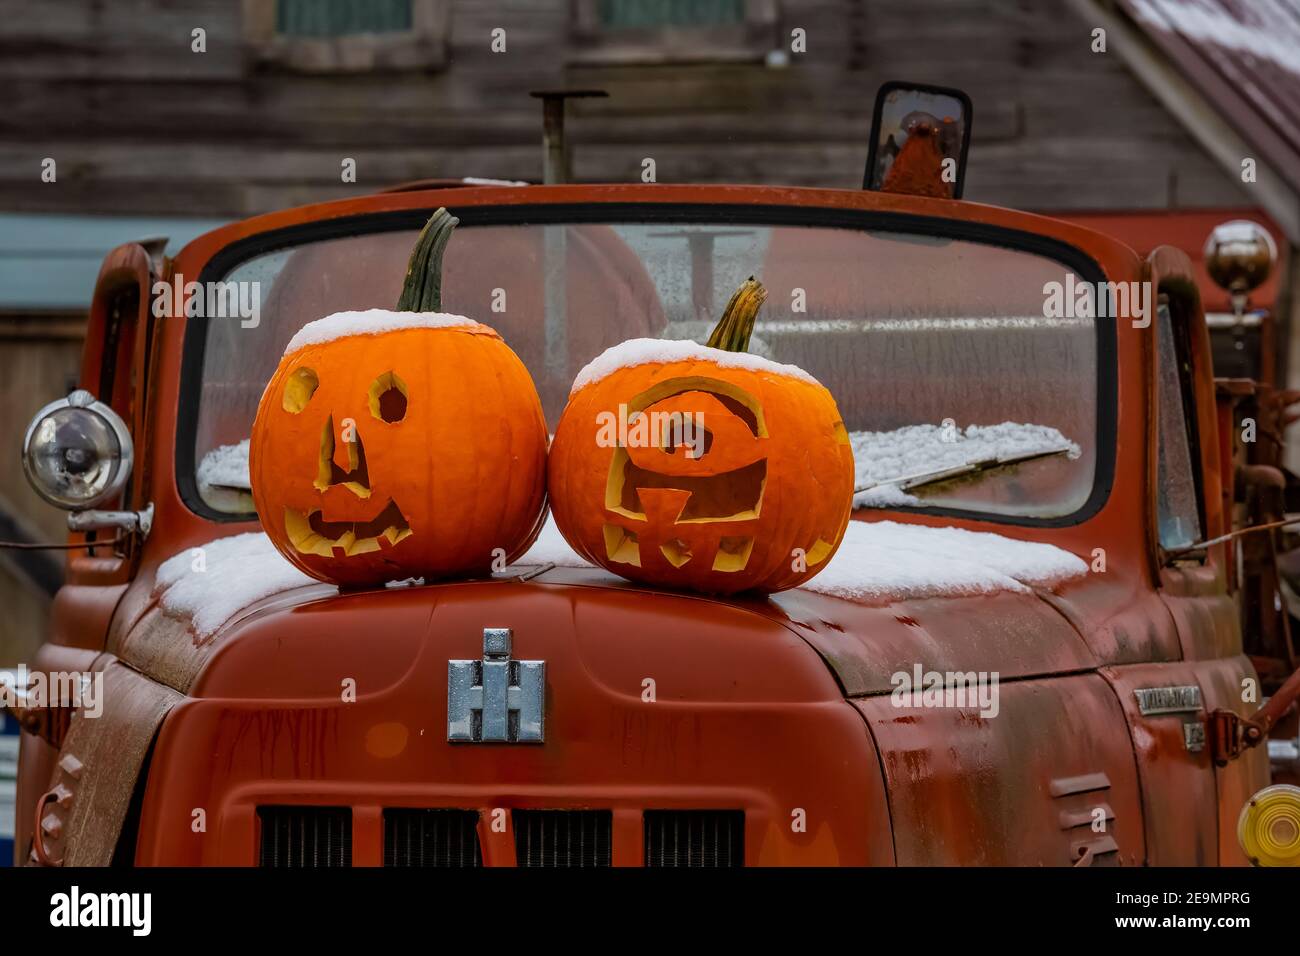 Carved pumpkins on the hood of an old International Harvester truck in the Skokomish Valley, Olympic Peninsula, Washington State, USA [No property rel Stock Photo